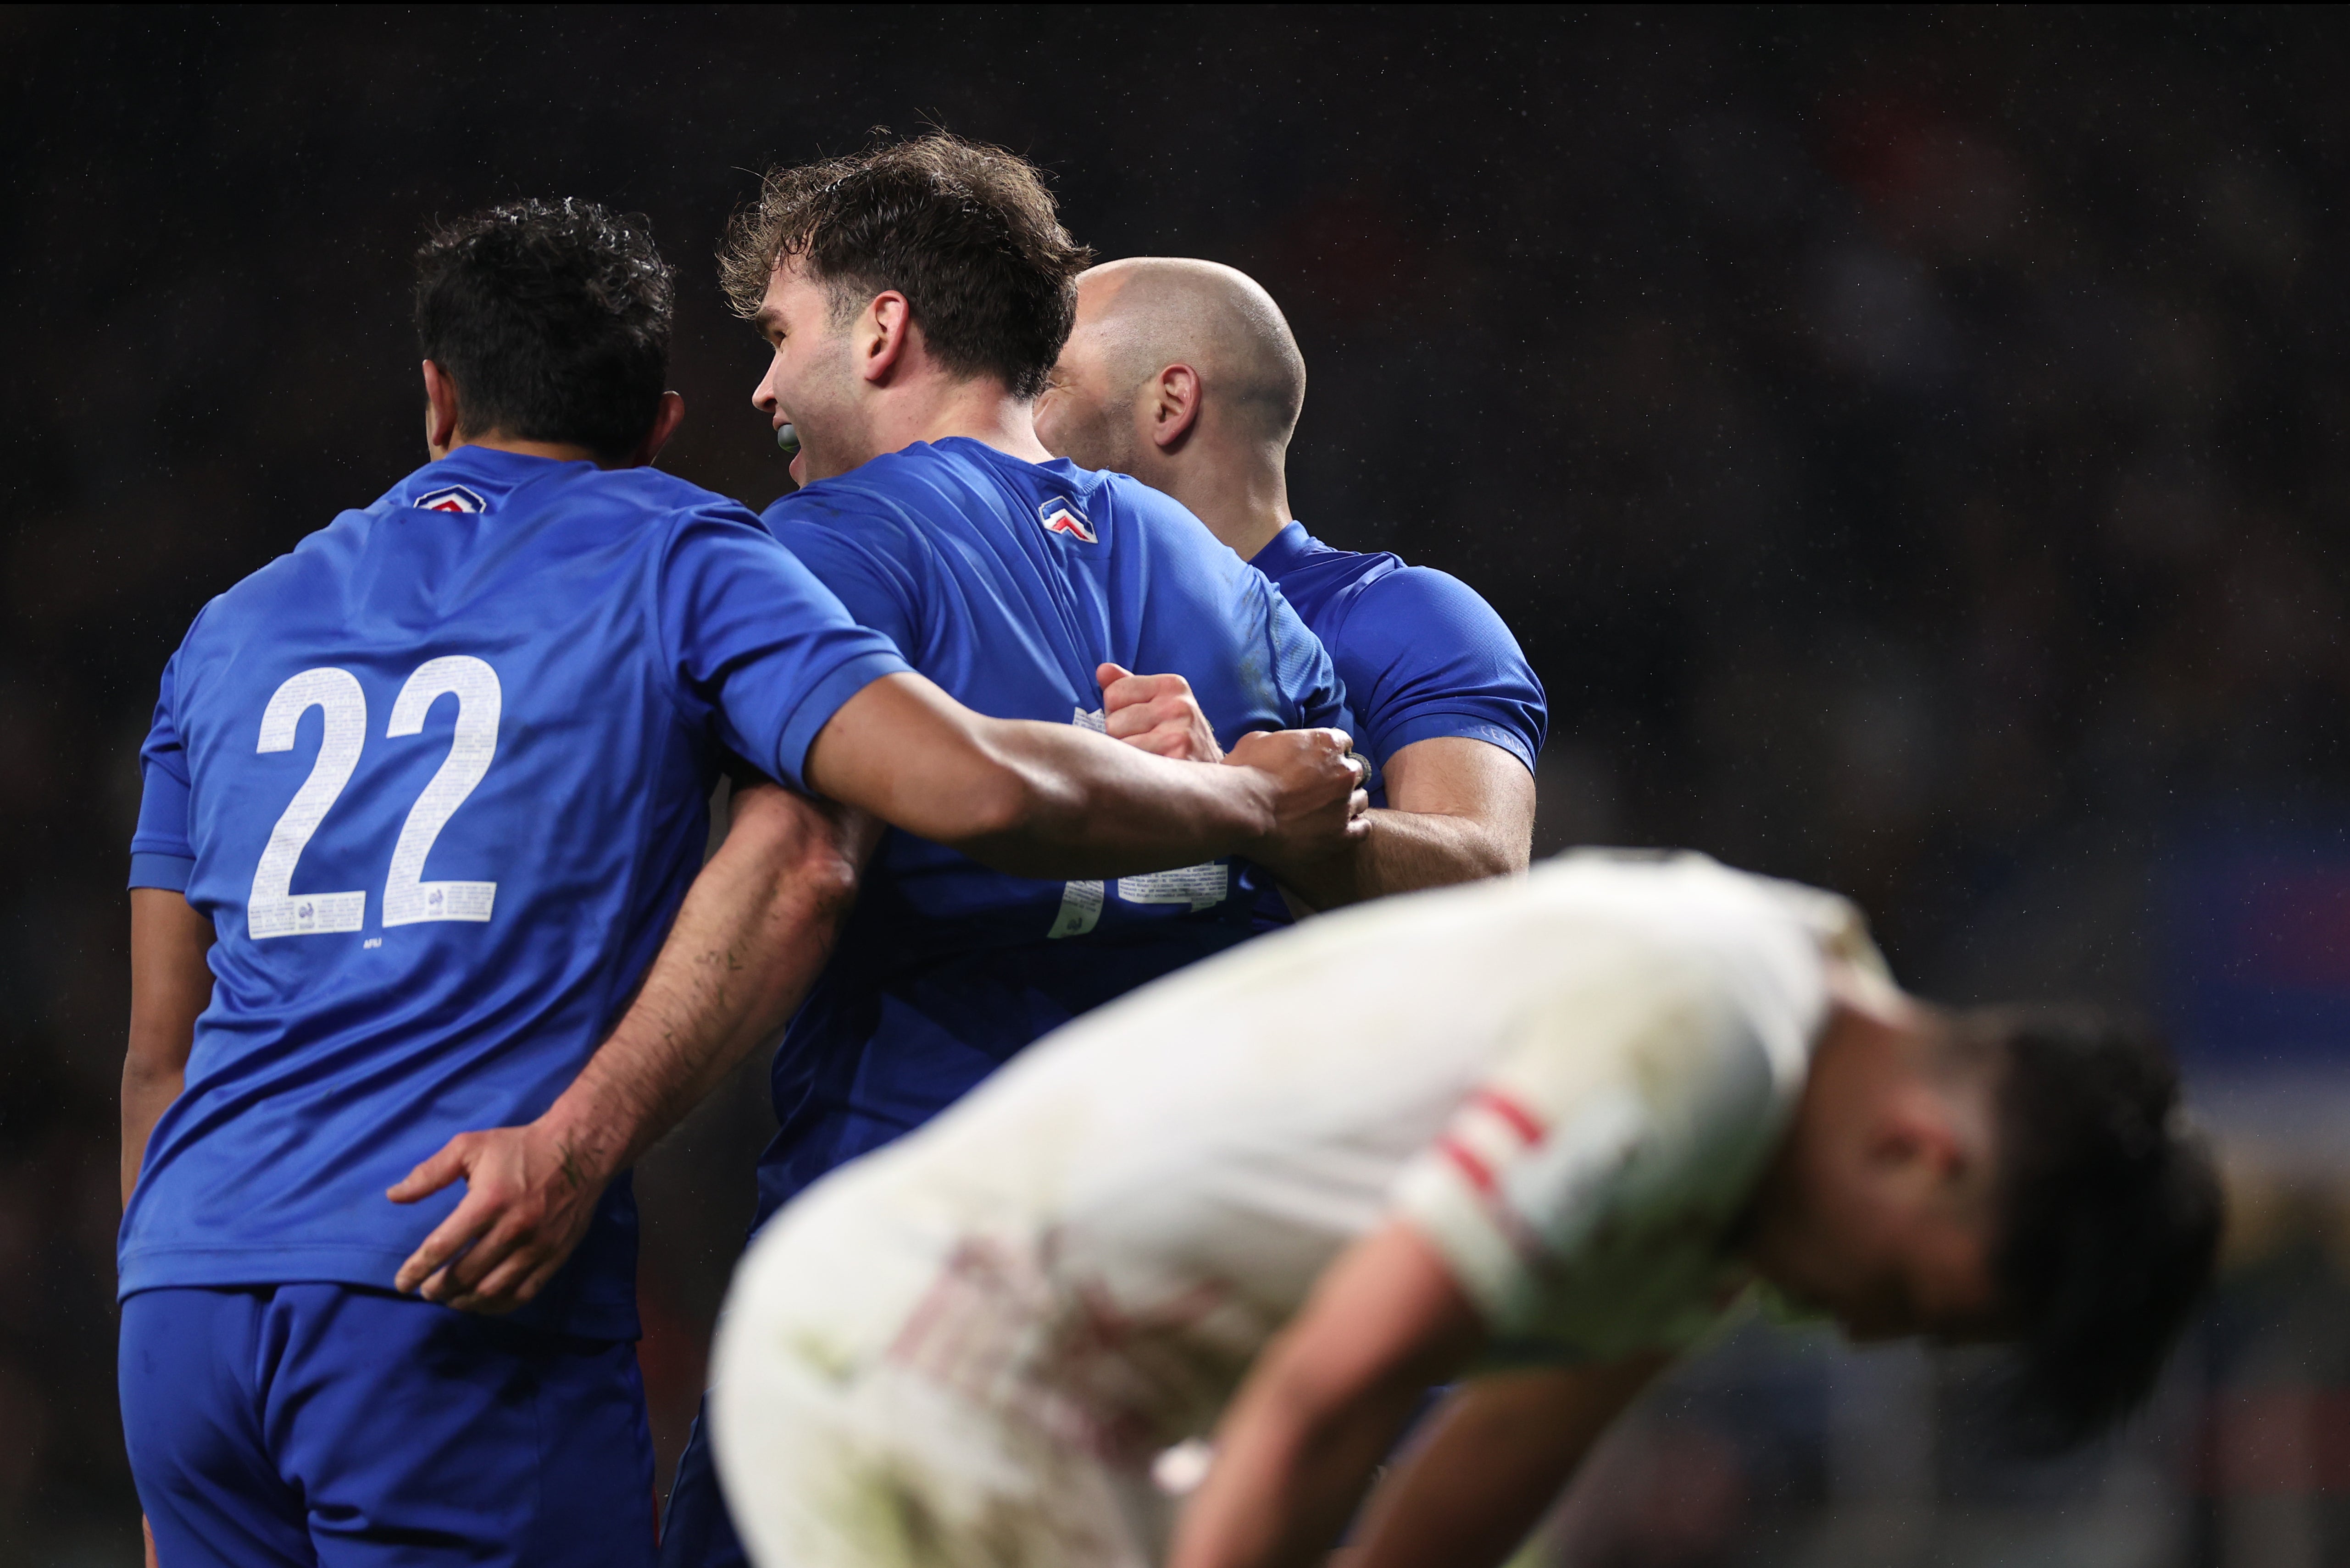 France thrashed England 53-10 at Twickenham last year, a record home defeat